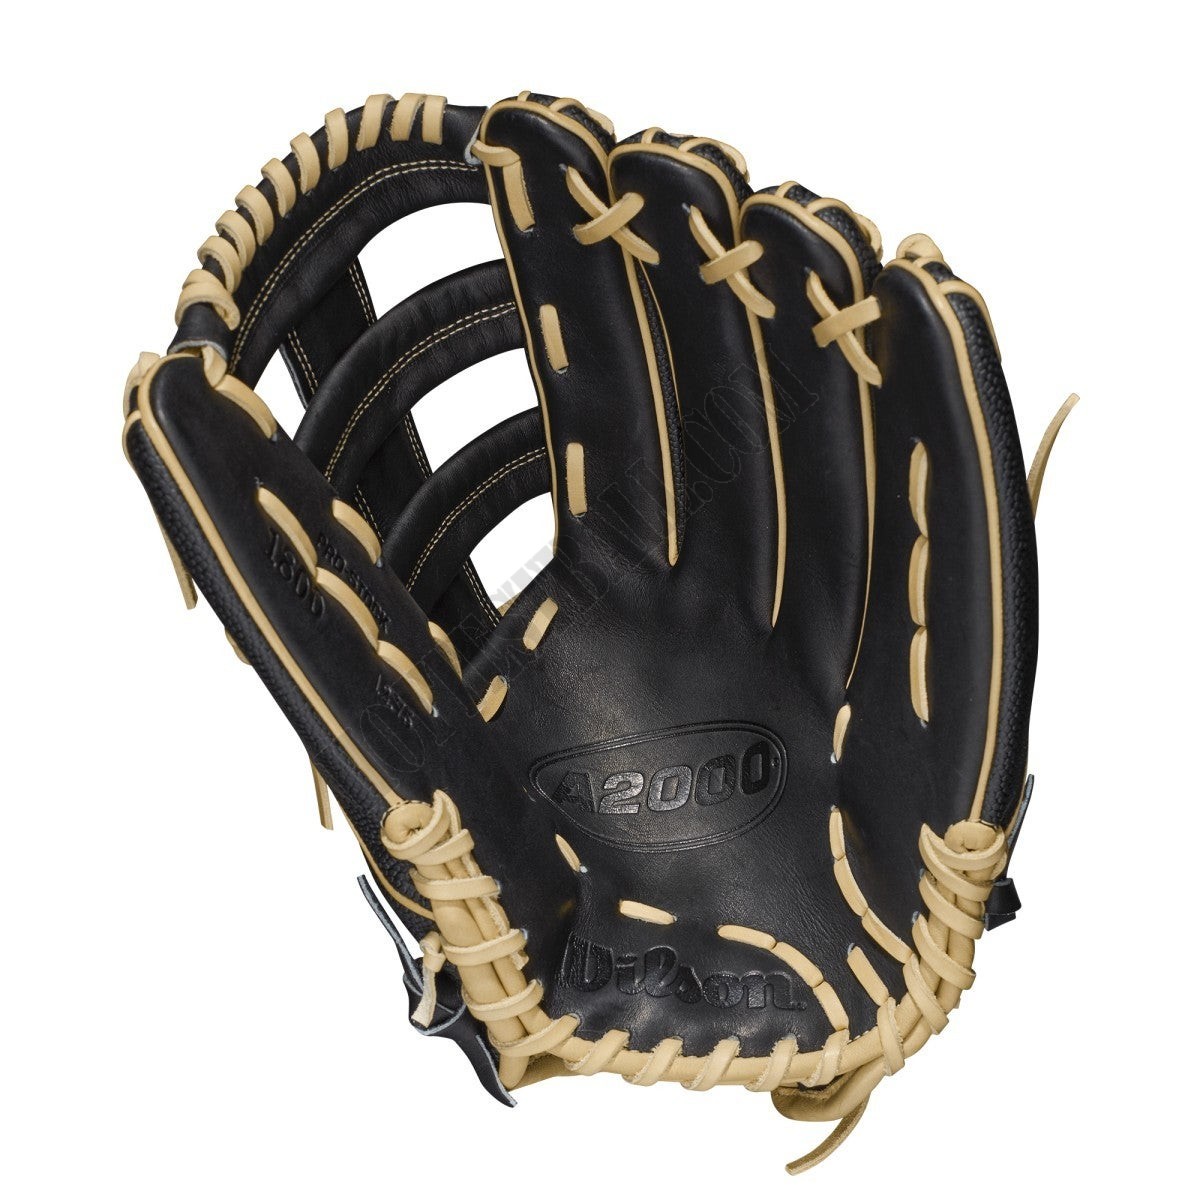 2021 A2000 1800SS 12.75" Outfield Baseball Glove ● Wilson Promotions - -2